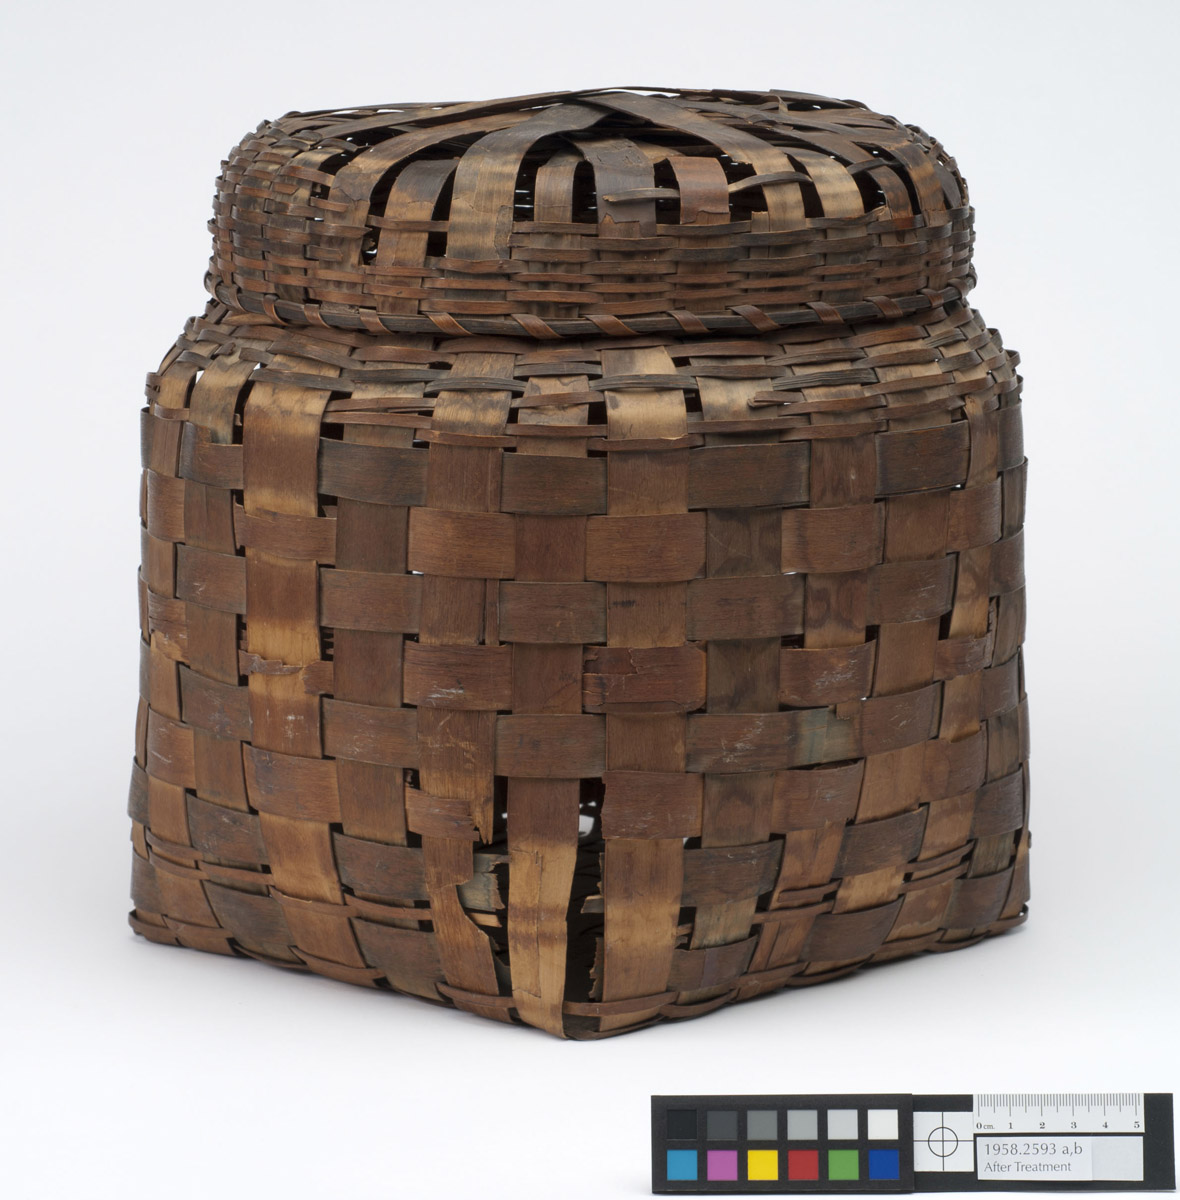 1958.2593 A, B Basket, view 1, after conservation treatment